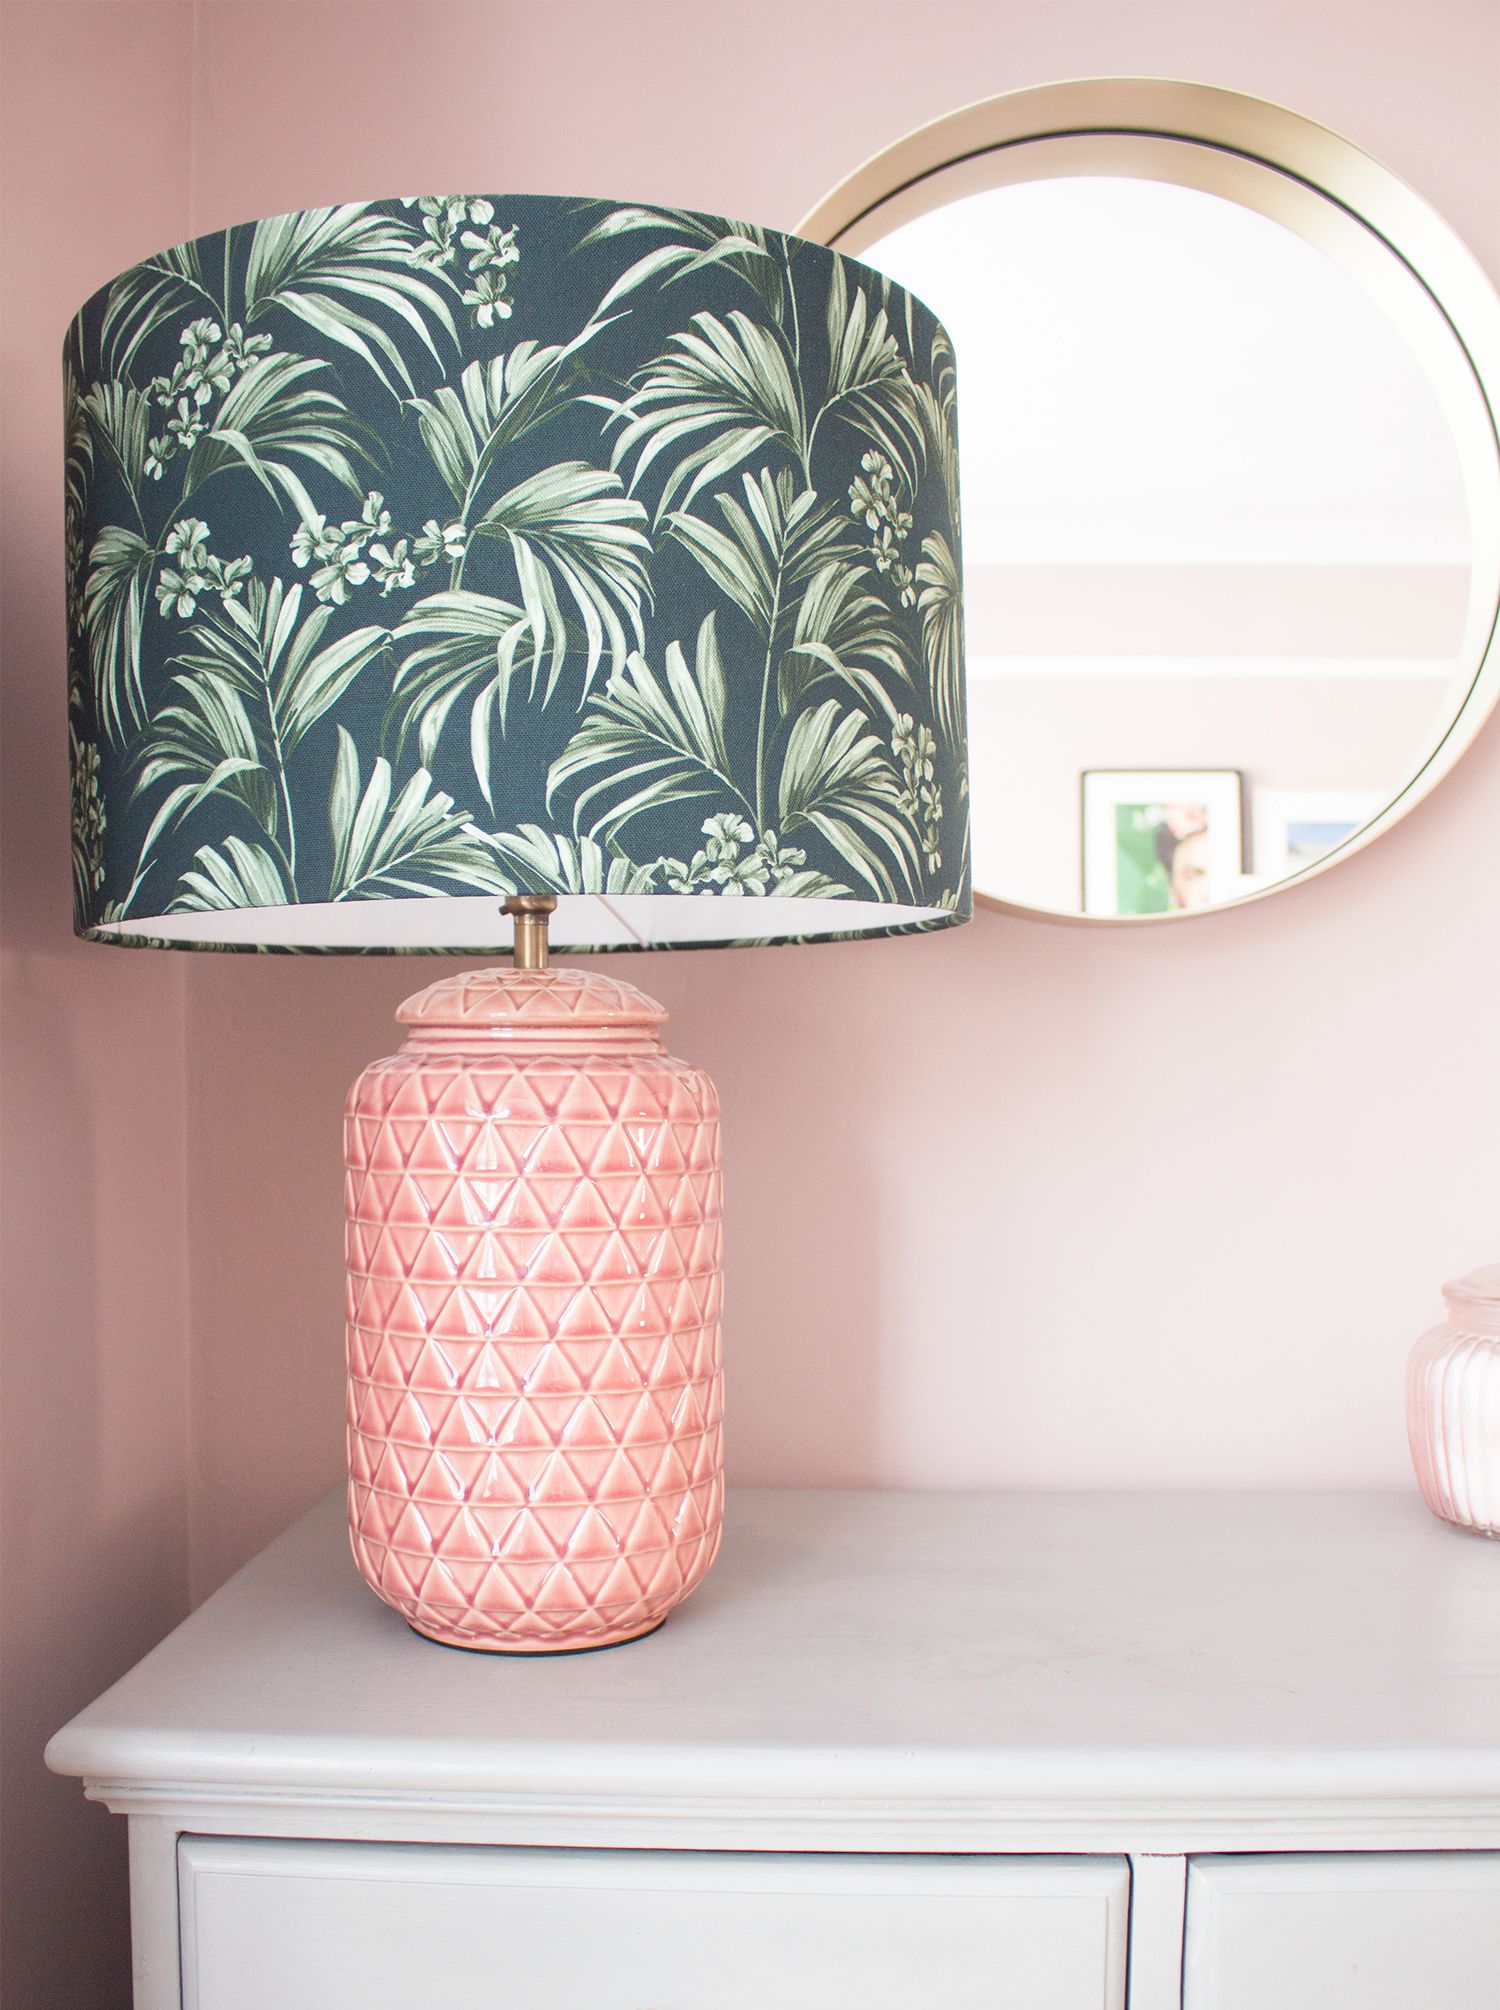 A close up of the new pink textured lamp with a green palm print lampshade on top of the grey chest of drawers.